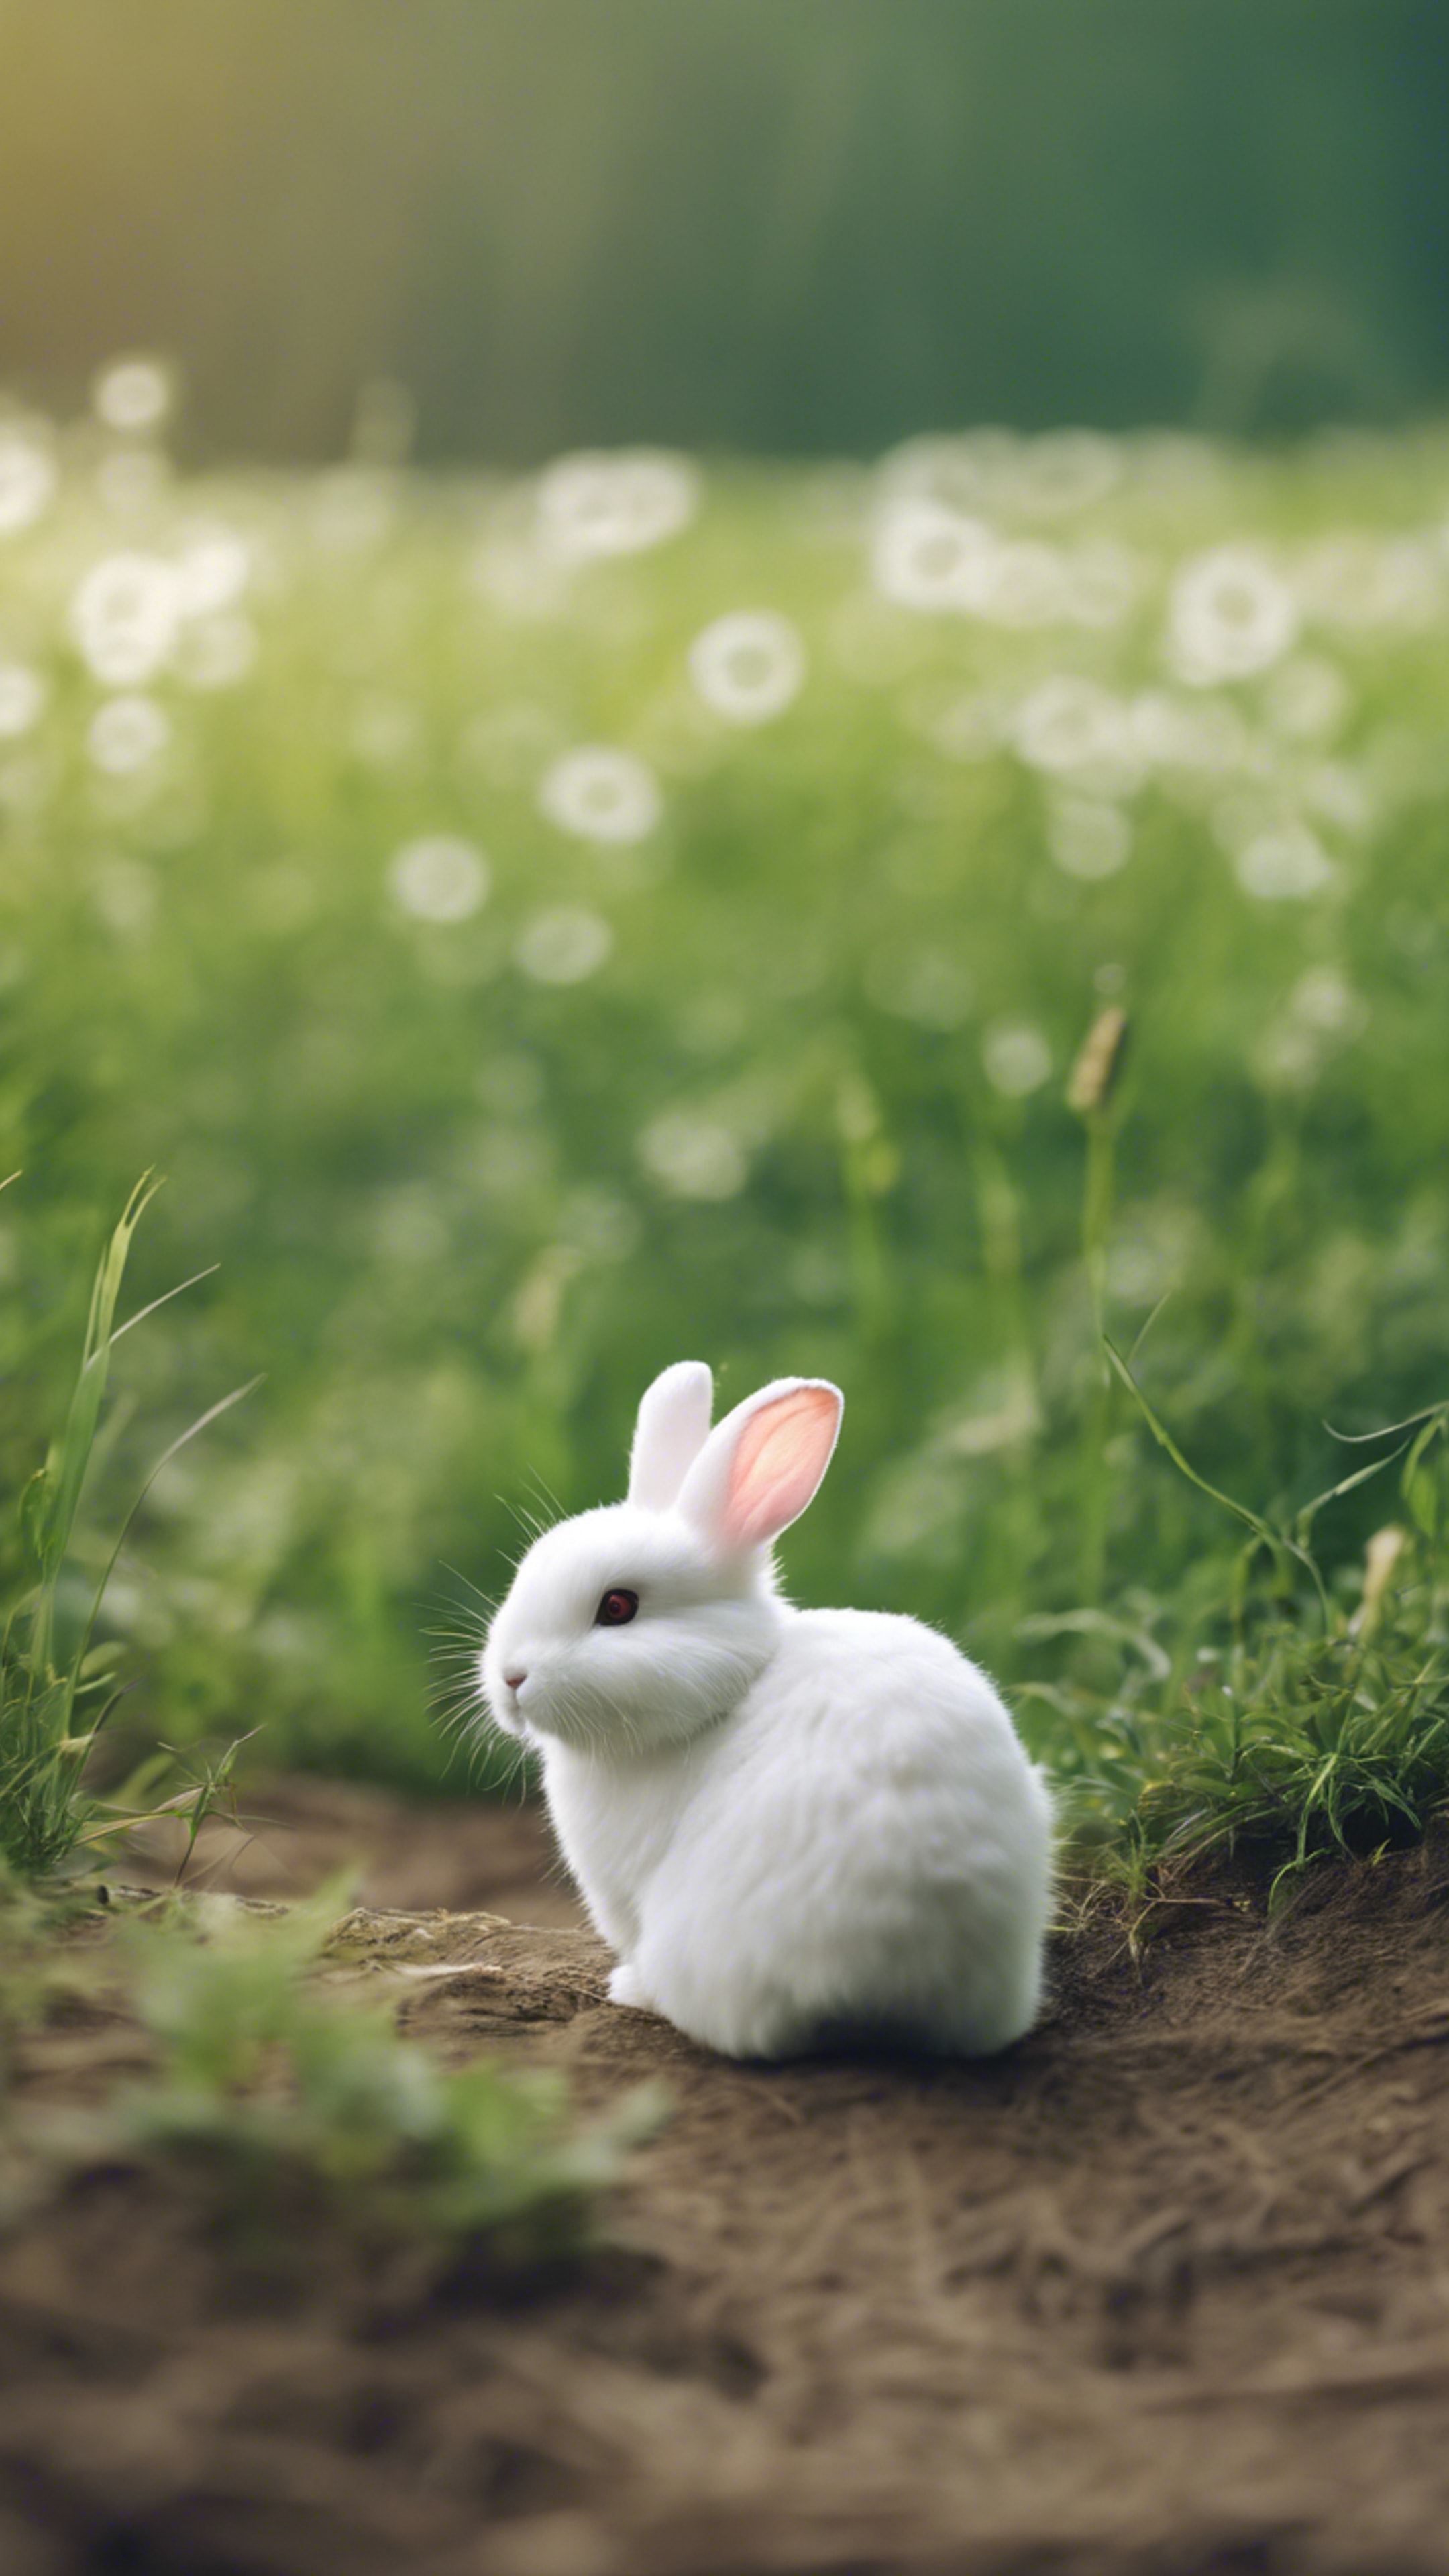 A kawaii white rabbit on a green field, fluffy tail flickering in the wind.壁紙[1912d35368704584b61e]